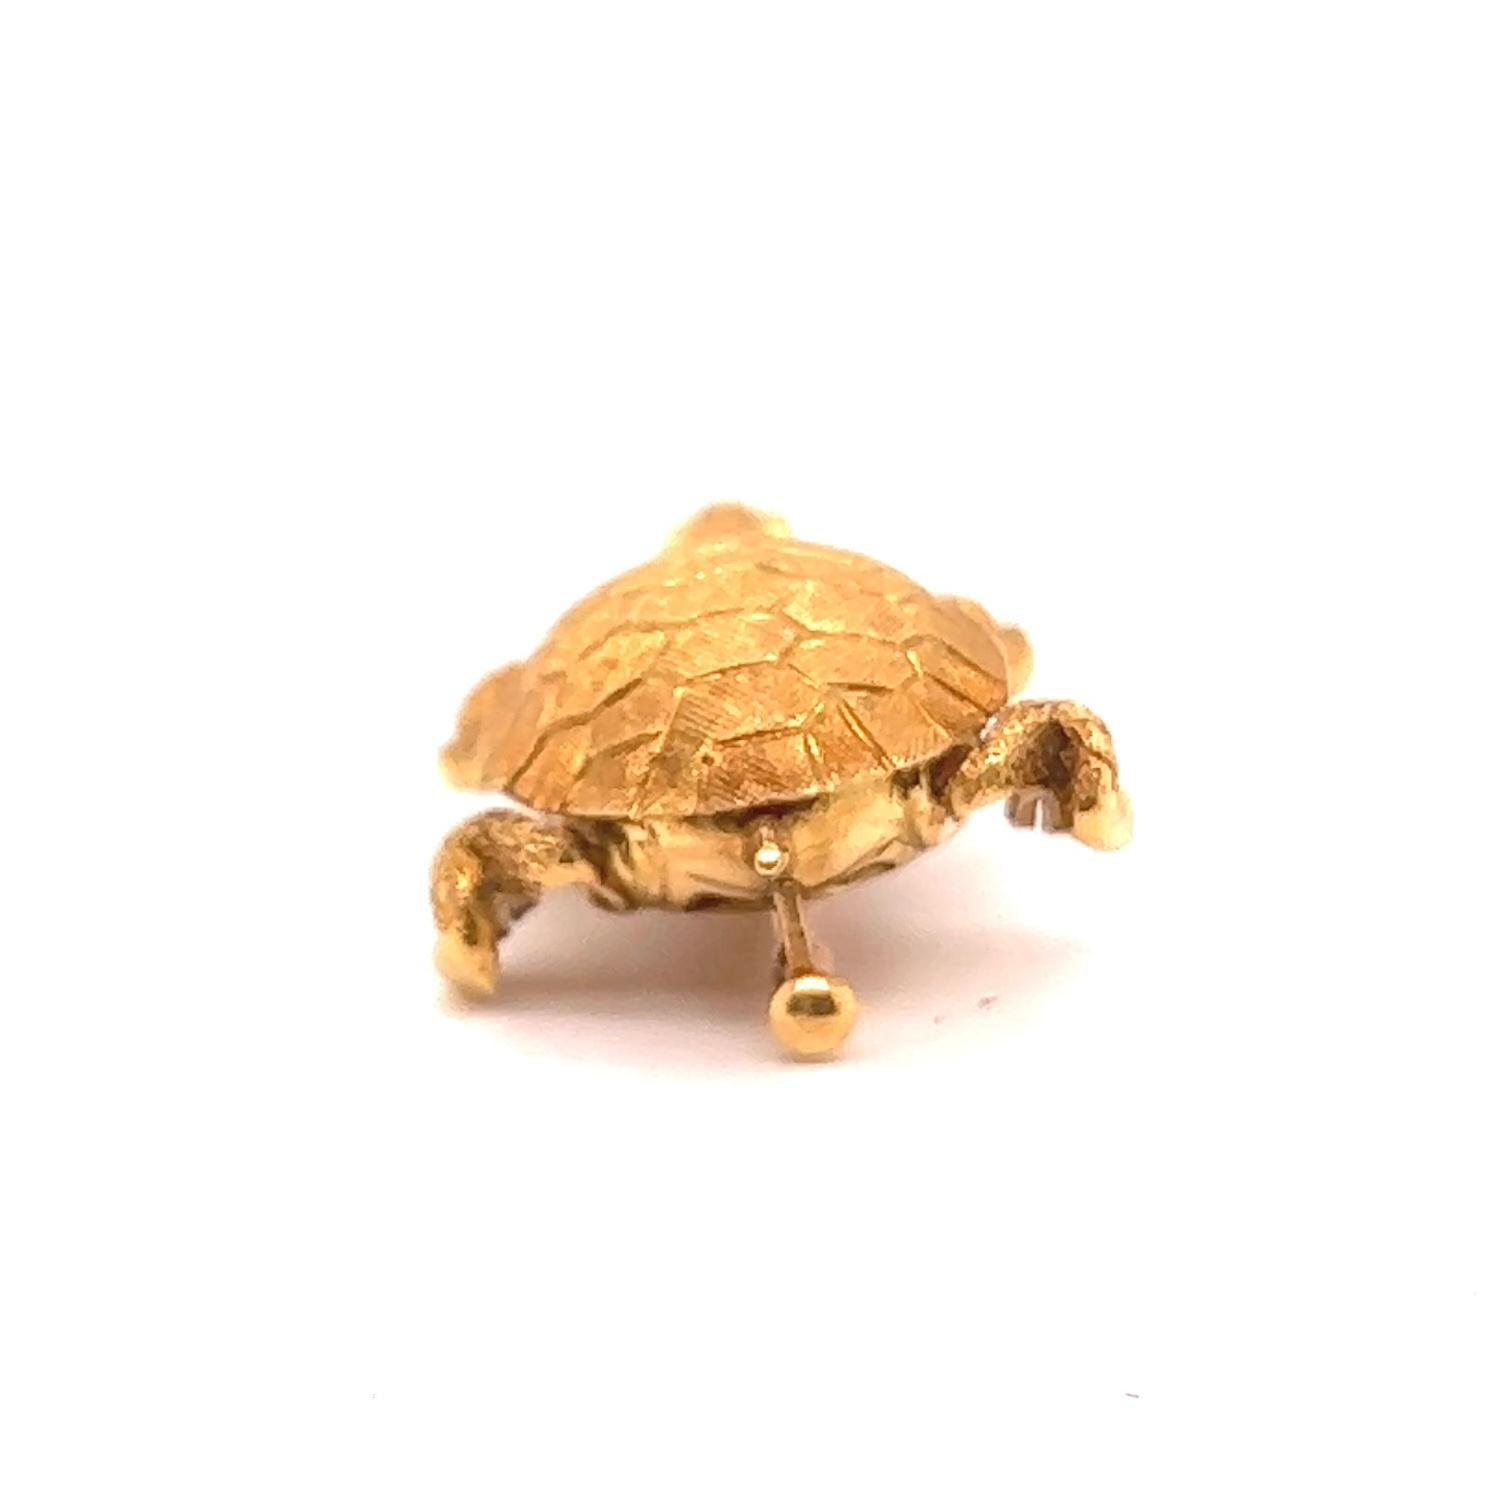 One Vintage French Sapphire 18 Karat Yellow Gold Turtle Brooch. Featuring two round sapphire with a total weight of approx 0.20 carats.Crafted in 18 karat yellow gold with French import marks. Circa 1960s. The brooch measures 1 1/2 by 1 inch.